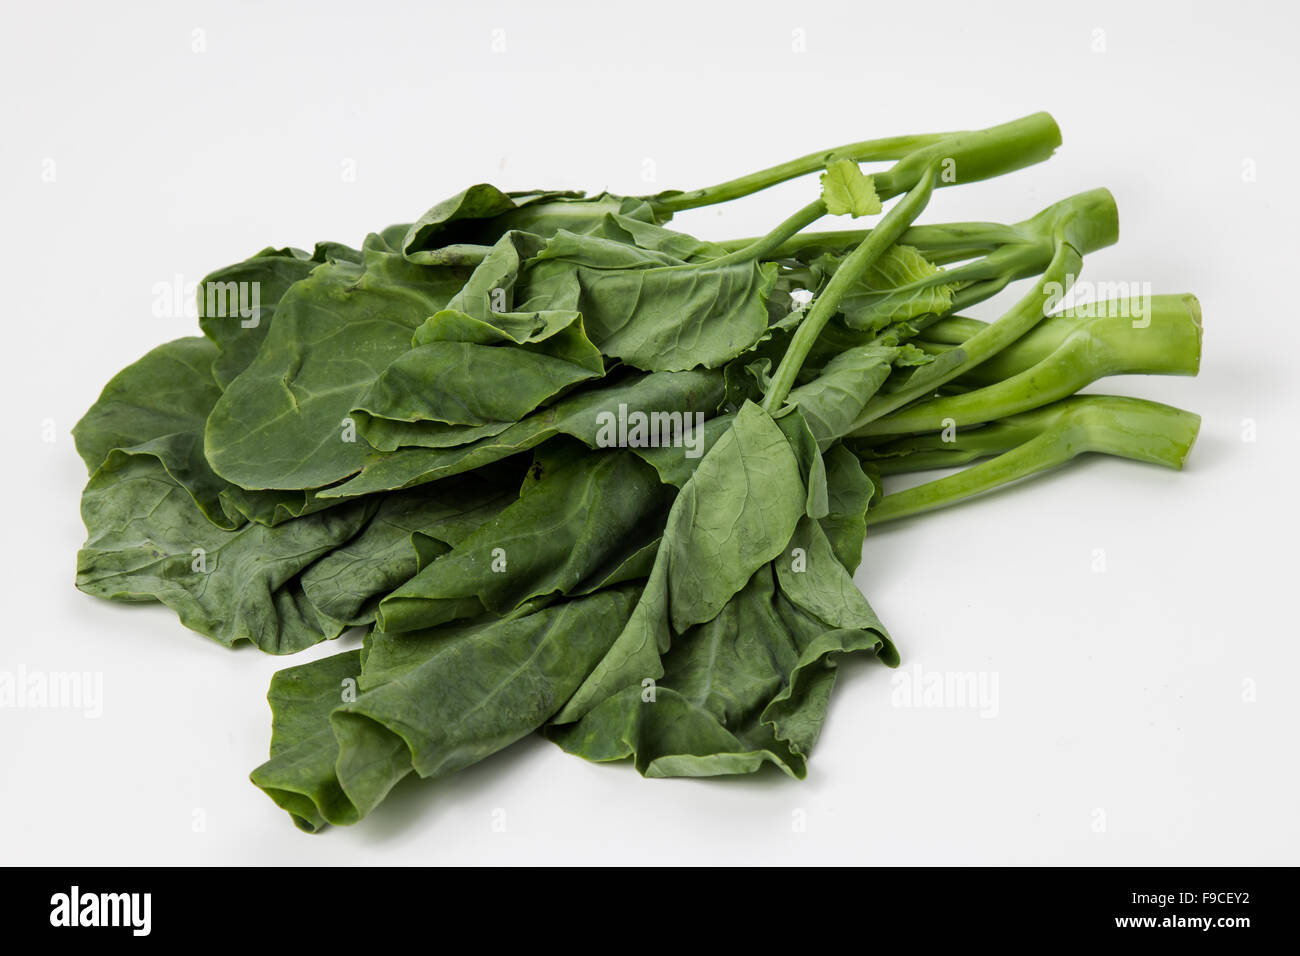 Kai-lan (also written as gai-lan) is the Cantonese name for a vegetable that is also known as Chinese broccoli or Chinese kale Stock Photo